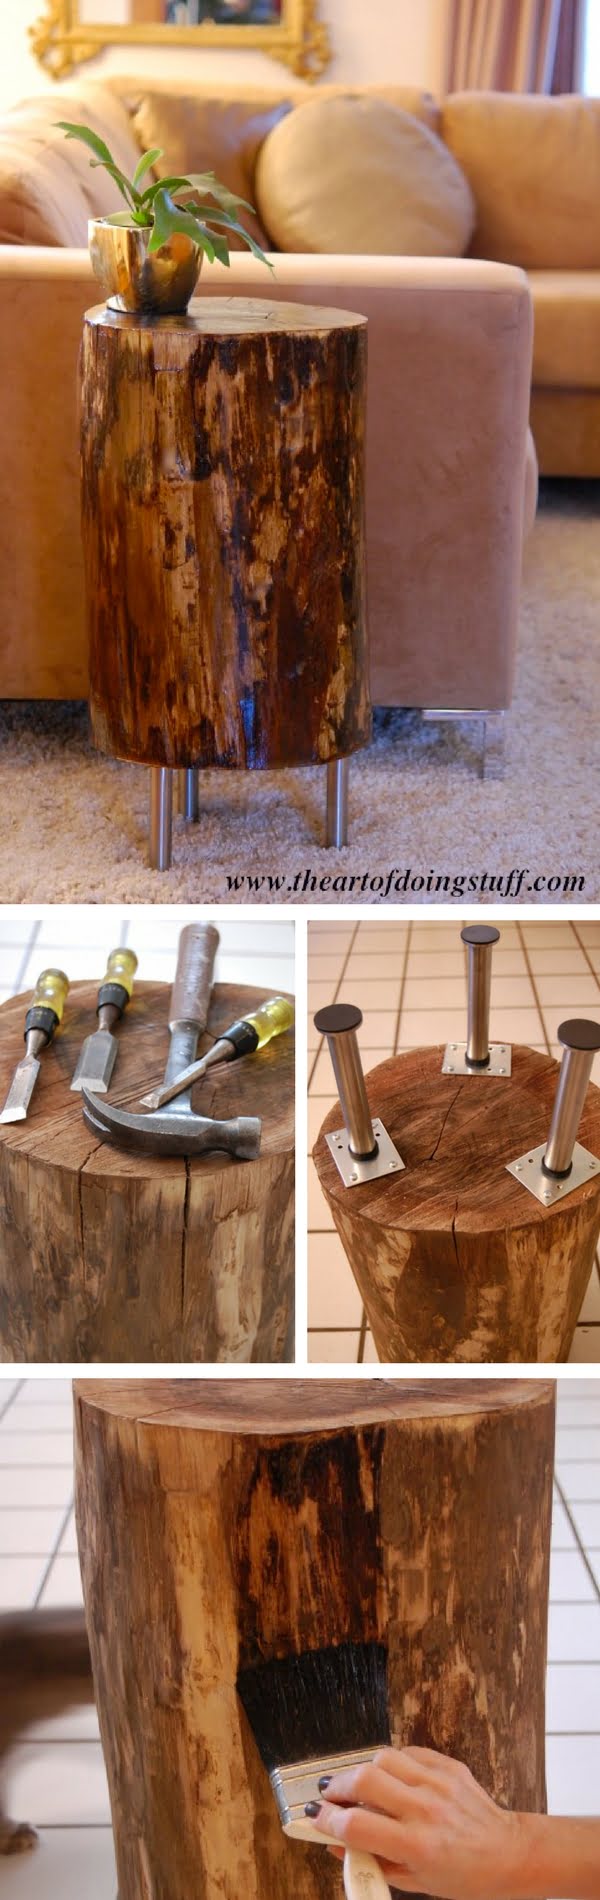 How to make a DIY tree stump side table 